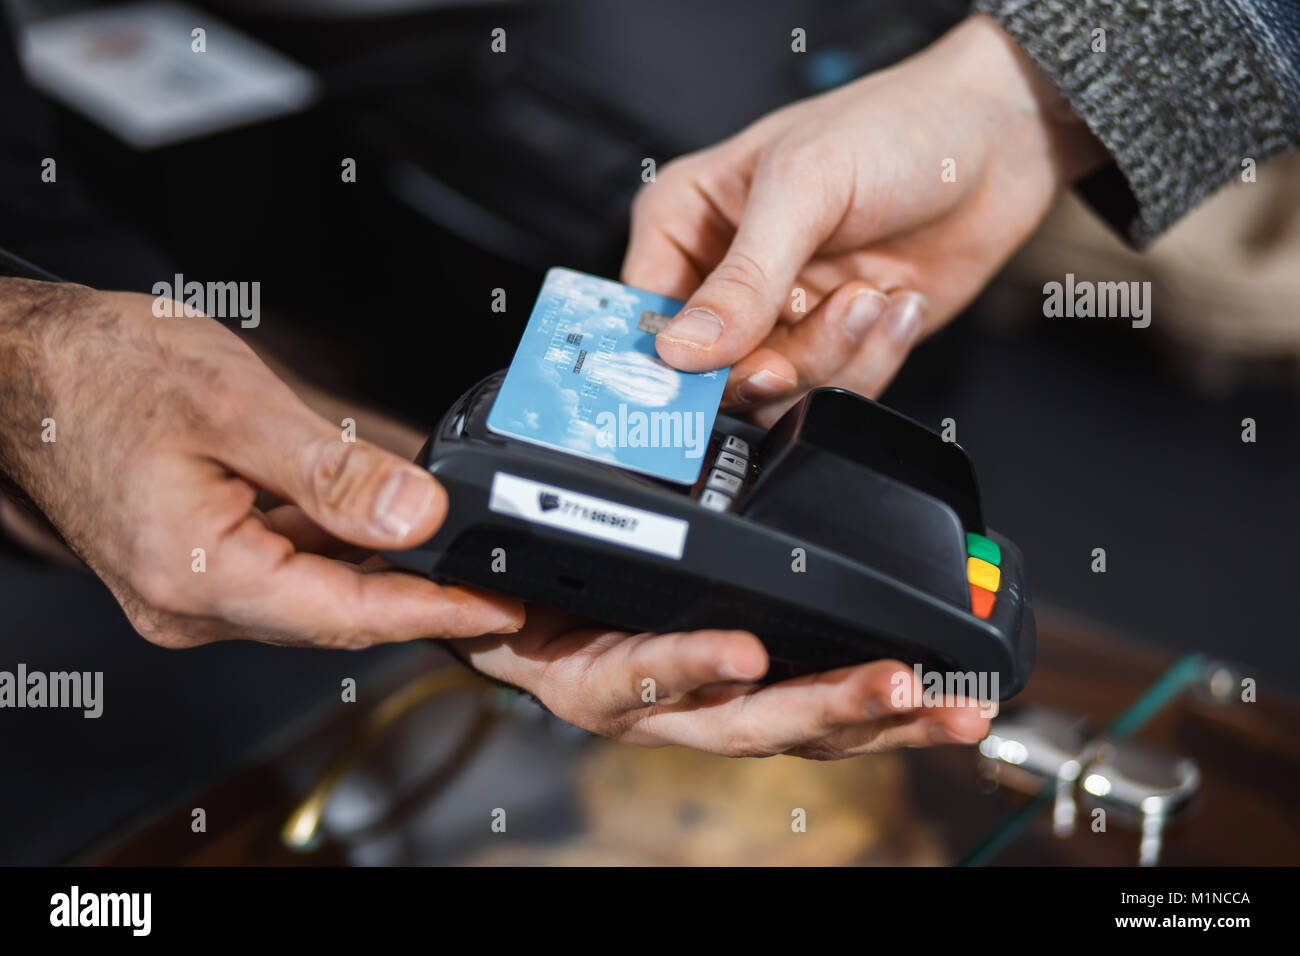 Customer is paying with contactless credit card in shop. Stock Photo